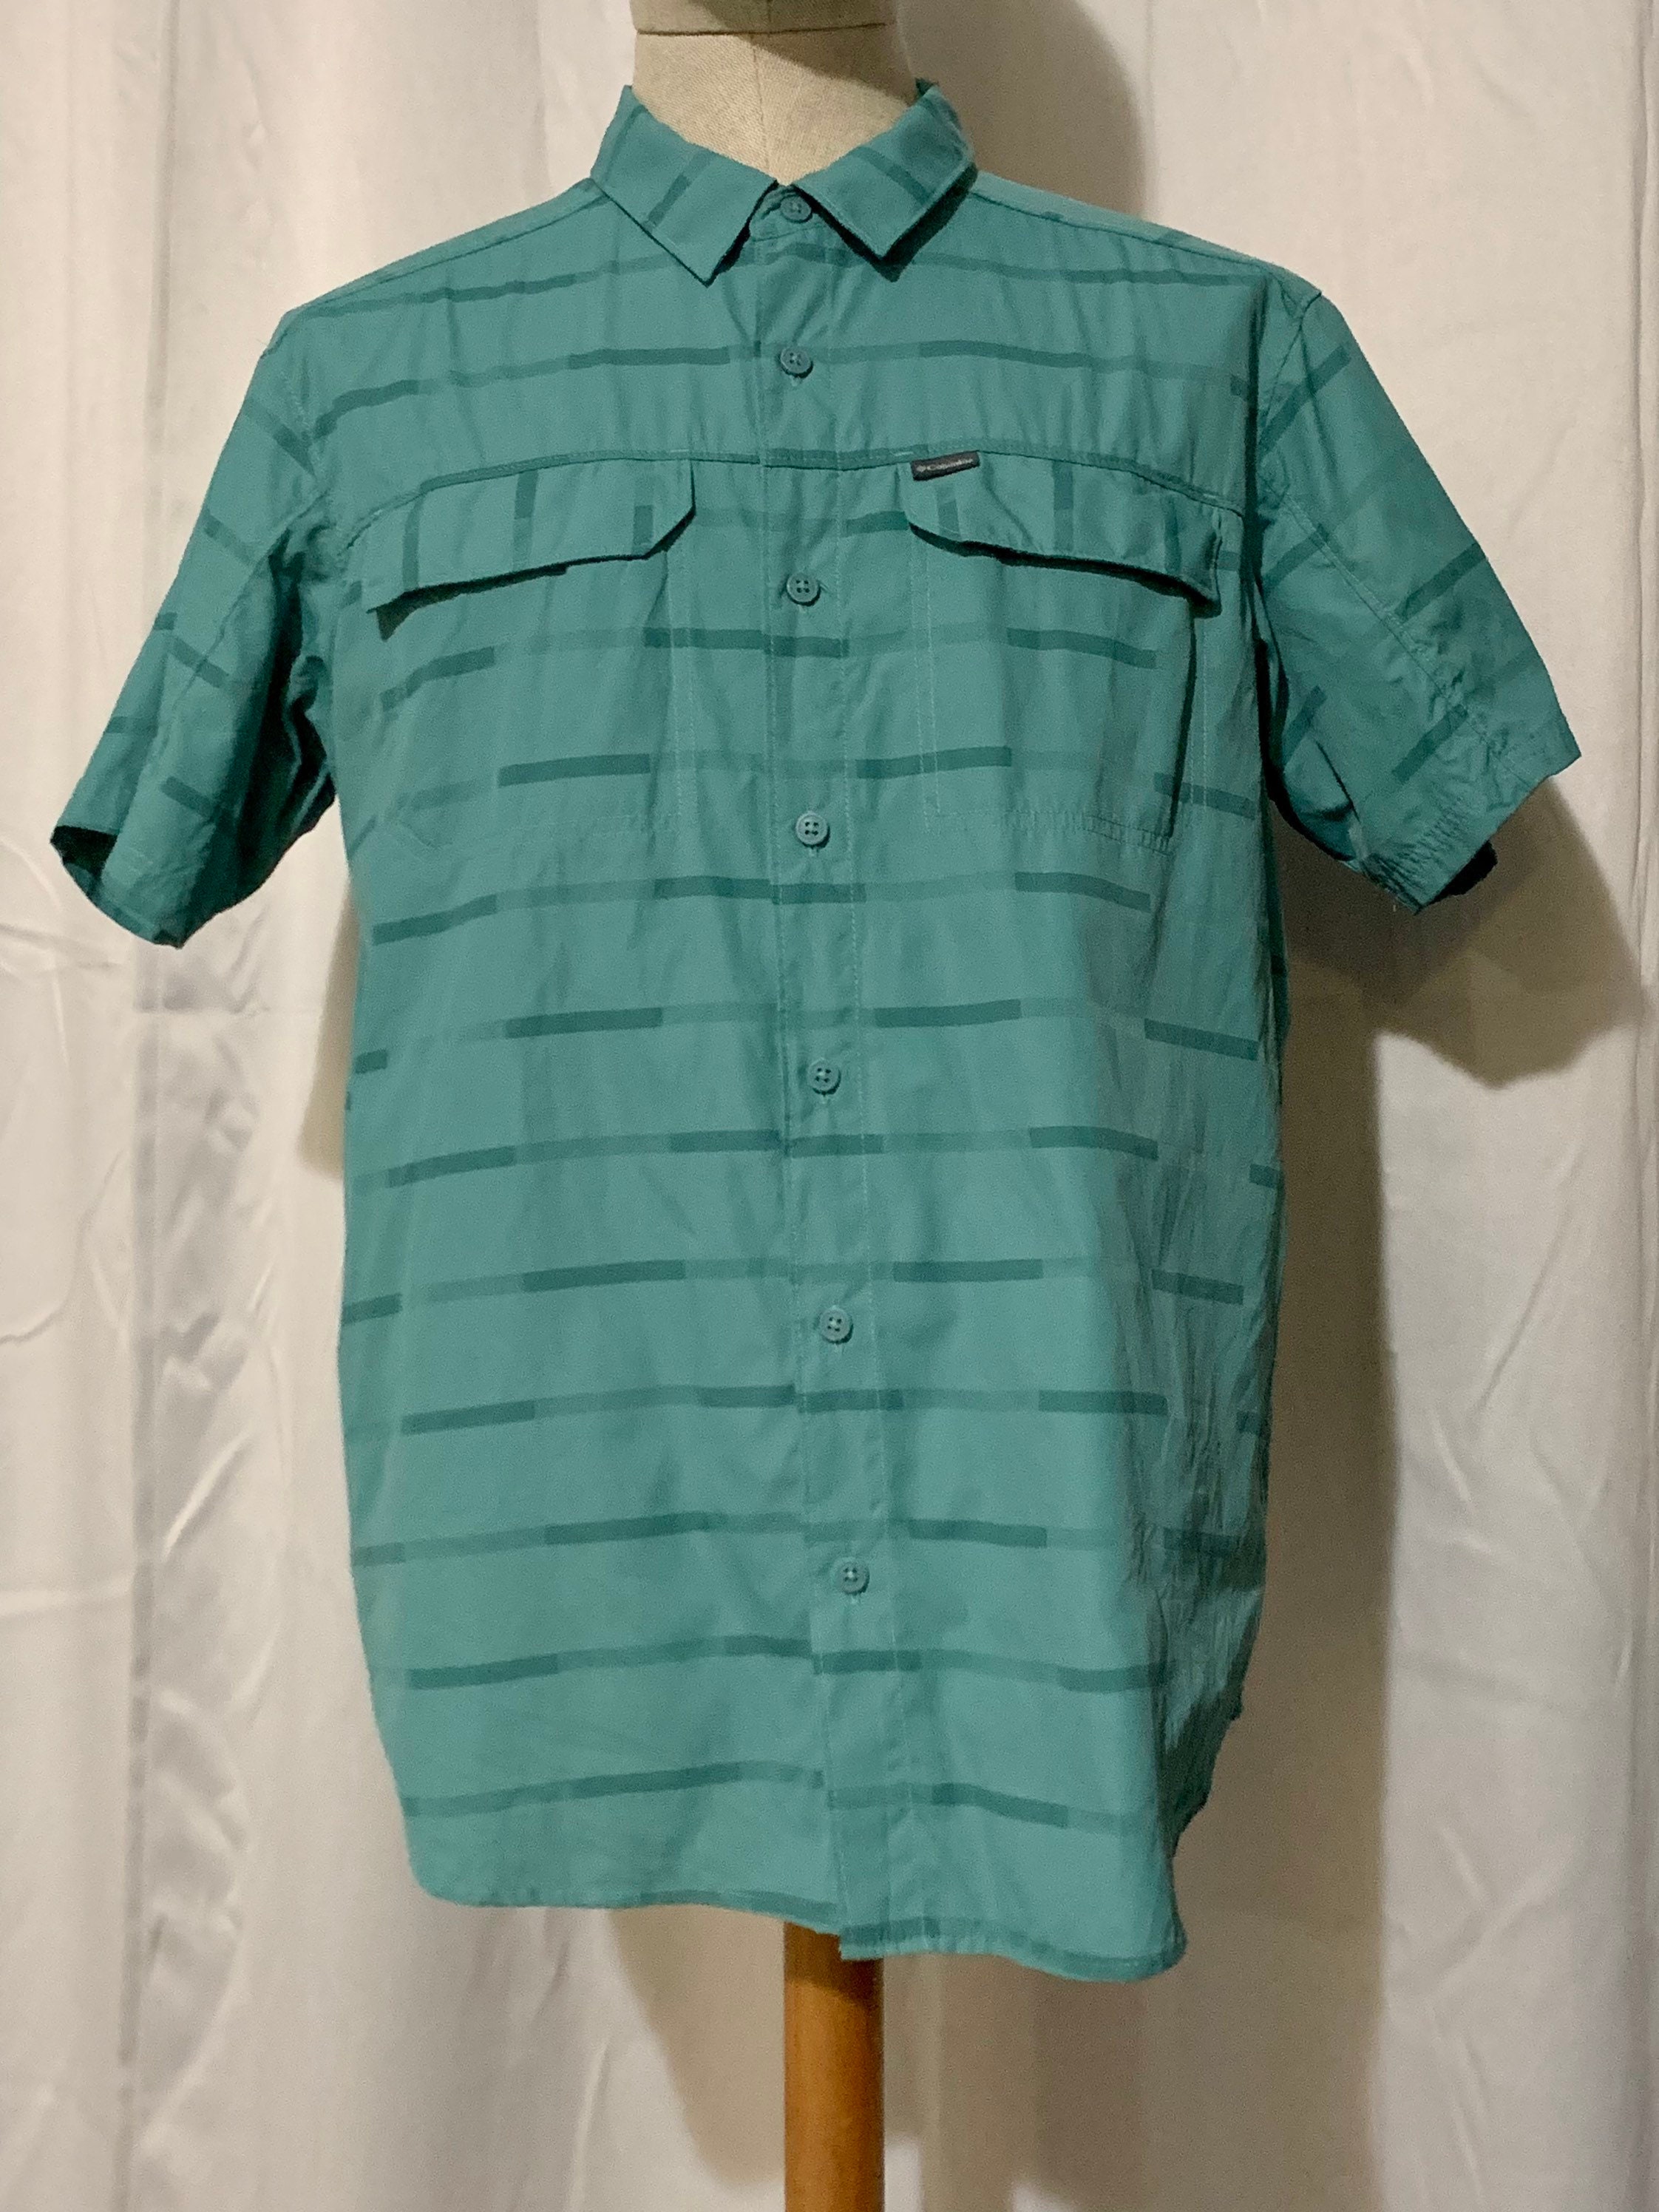 Fishing Shirt Men's Size L Columbia Omni-Shade Sun Protection Vented Button  Down